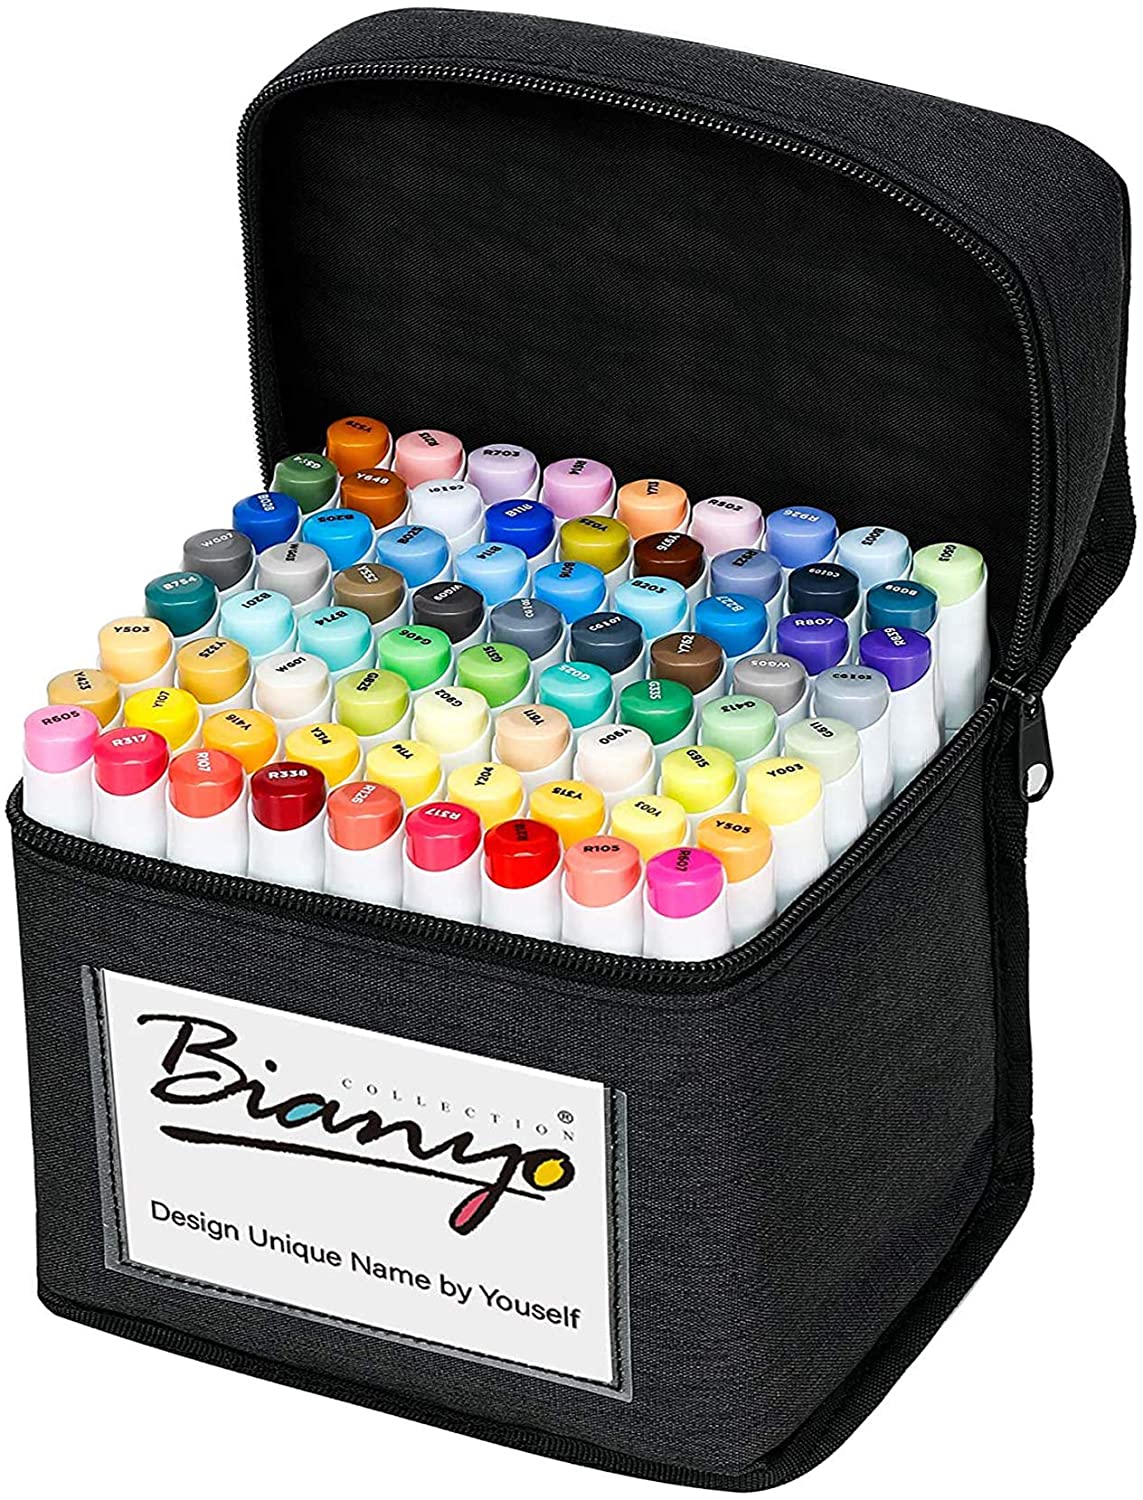 Bianyo Classic Series Alcohol-Based Dual Tip Art Markers Set of 2